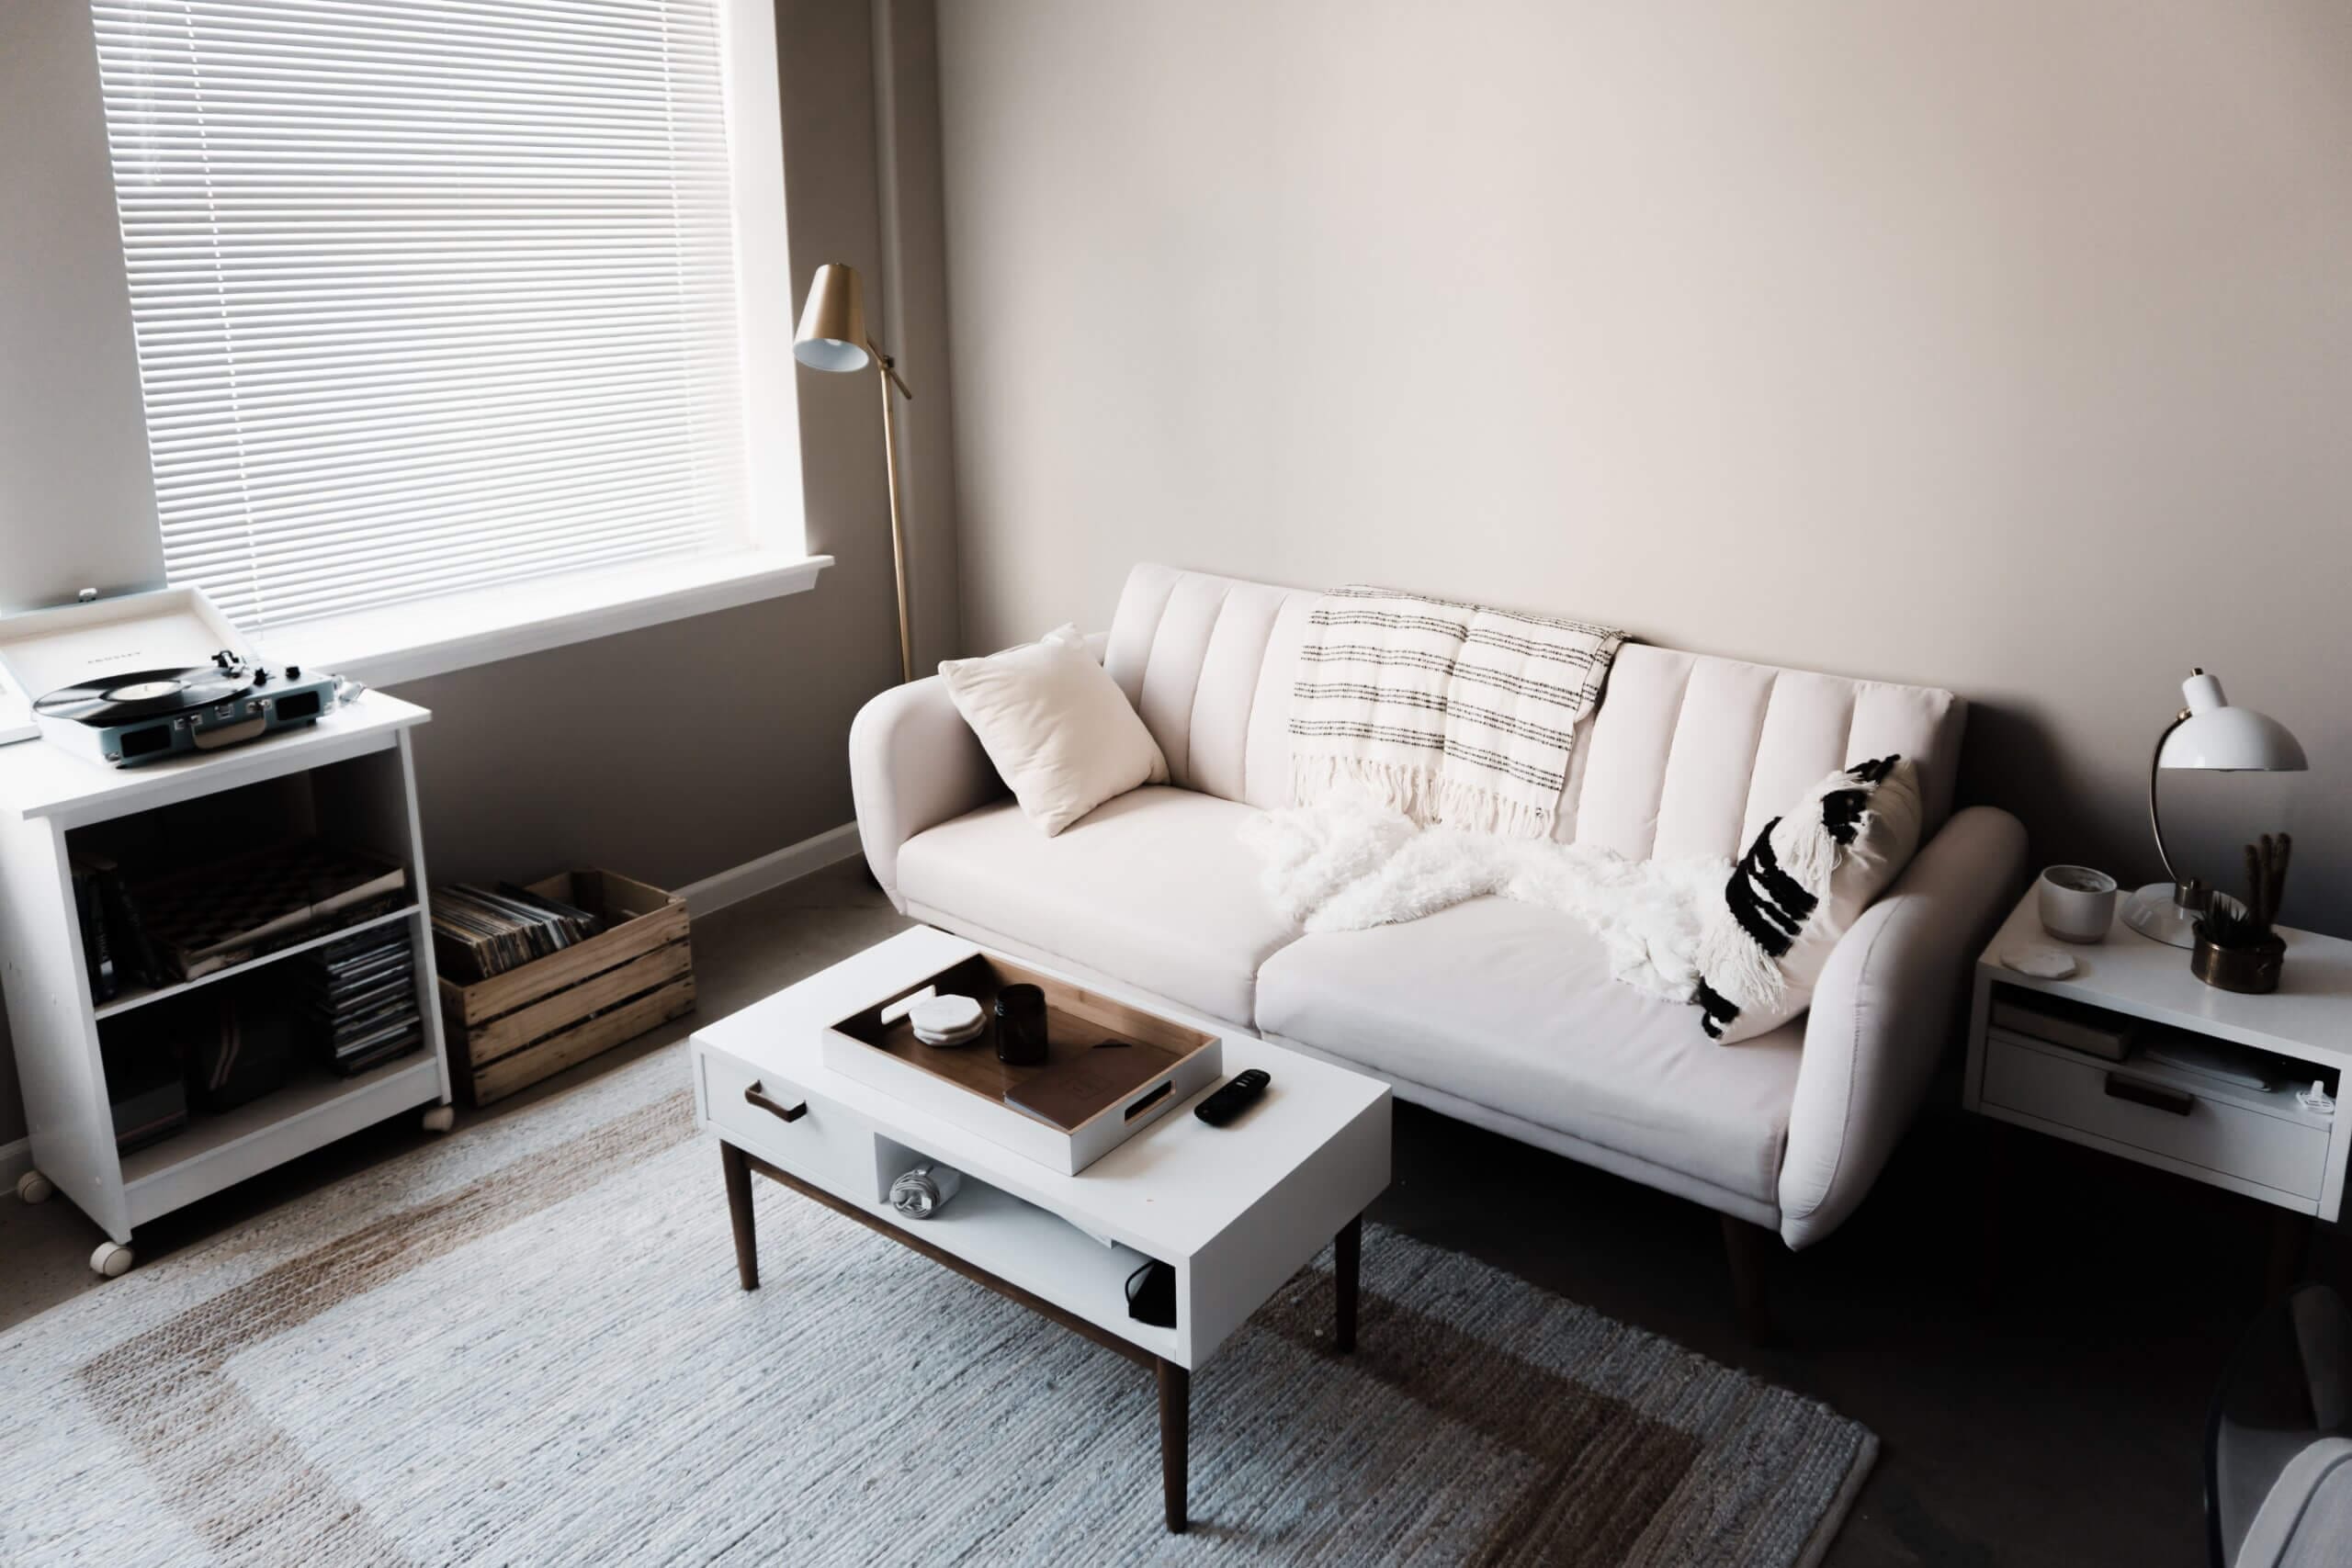 5 Critical Benefits of Maintaining a Clean Apartment